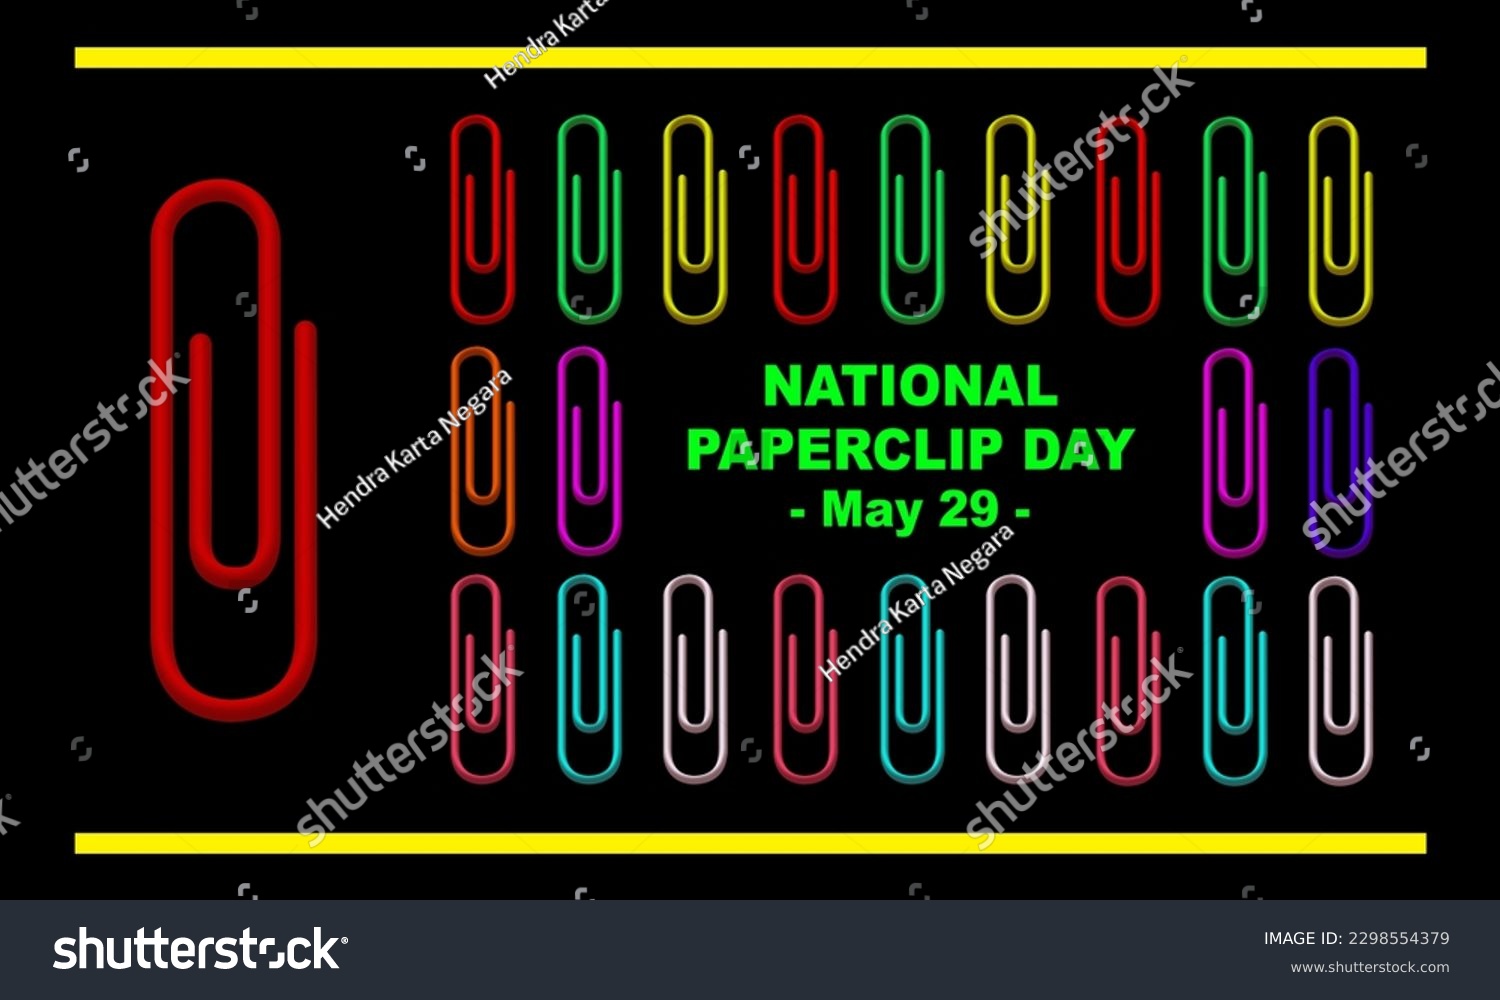 SVG of one big red paper clip and several colored paper clips neatly arranged with Bold text in the middle to commemorate NATIONAL PAPERCLIP DAY on May 29 svg